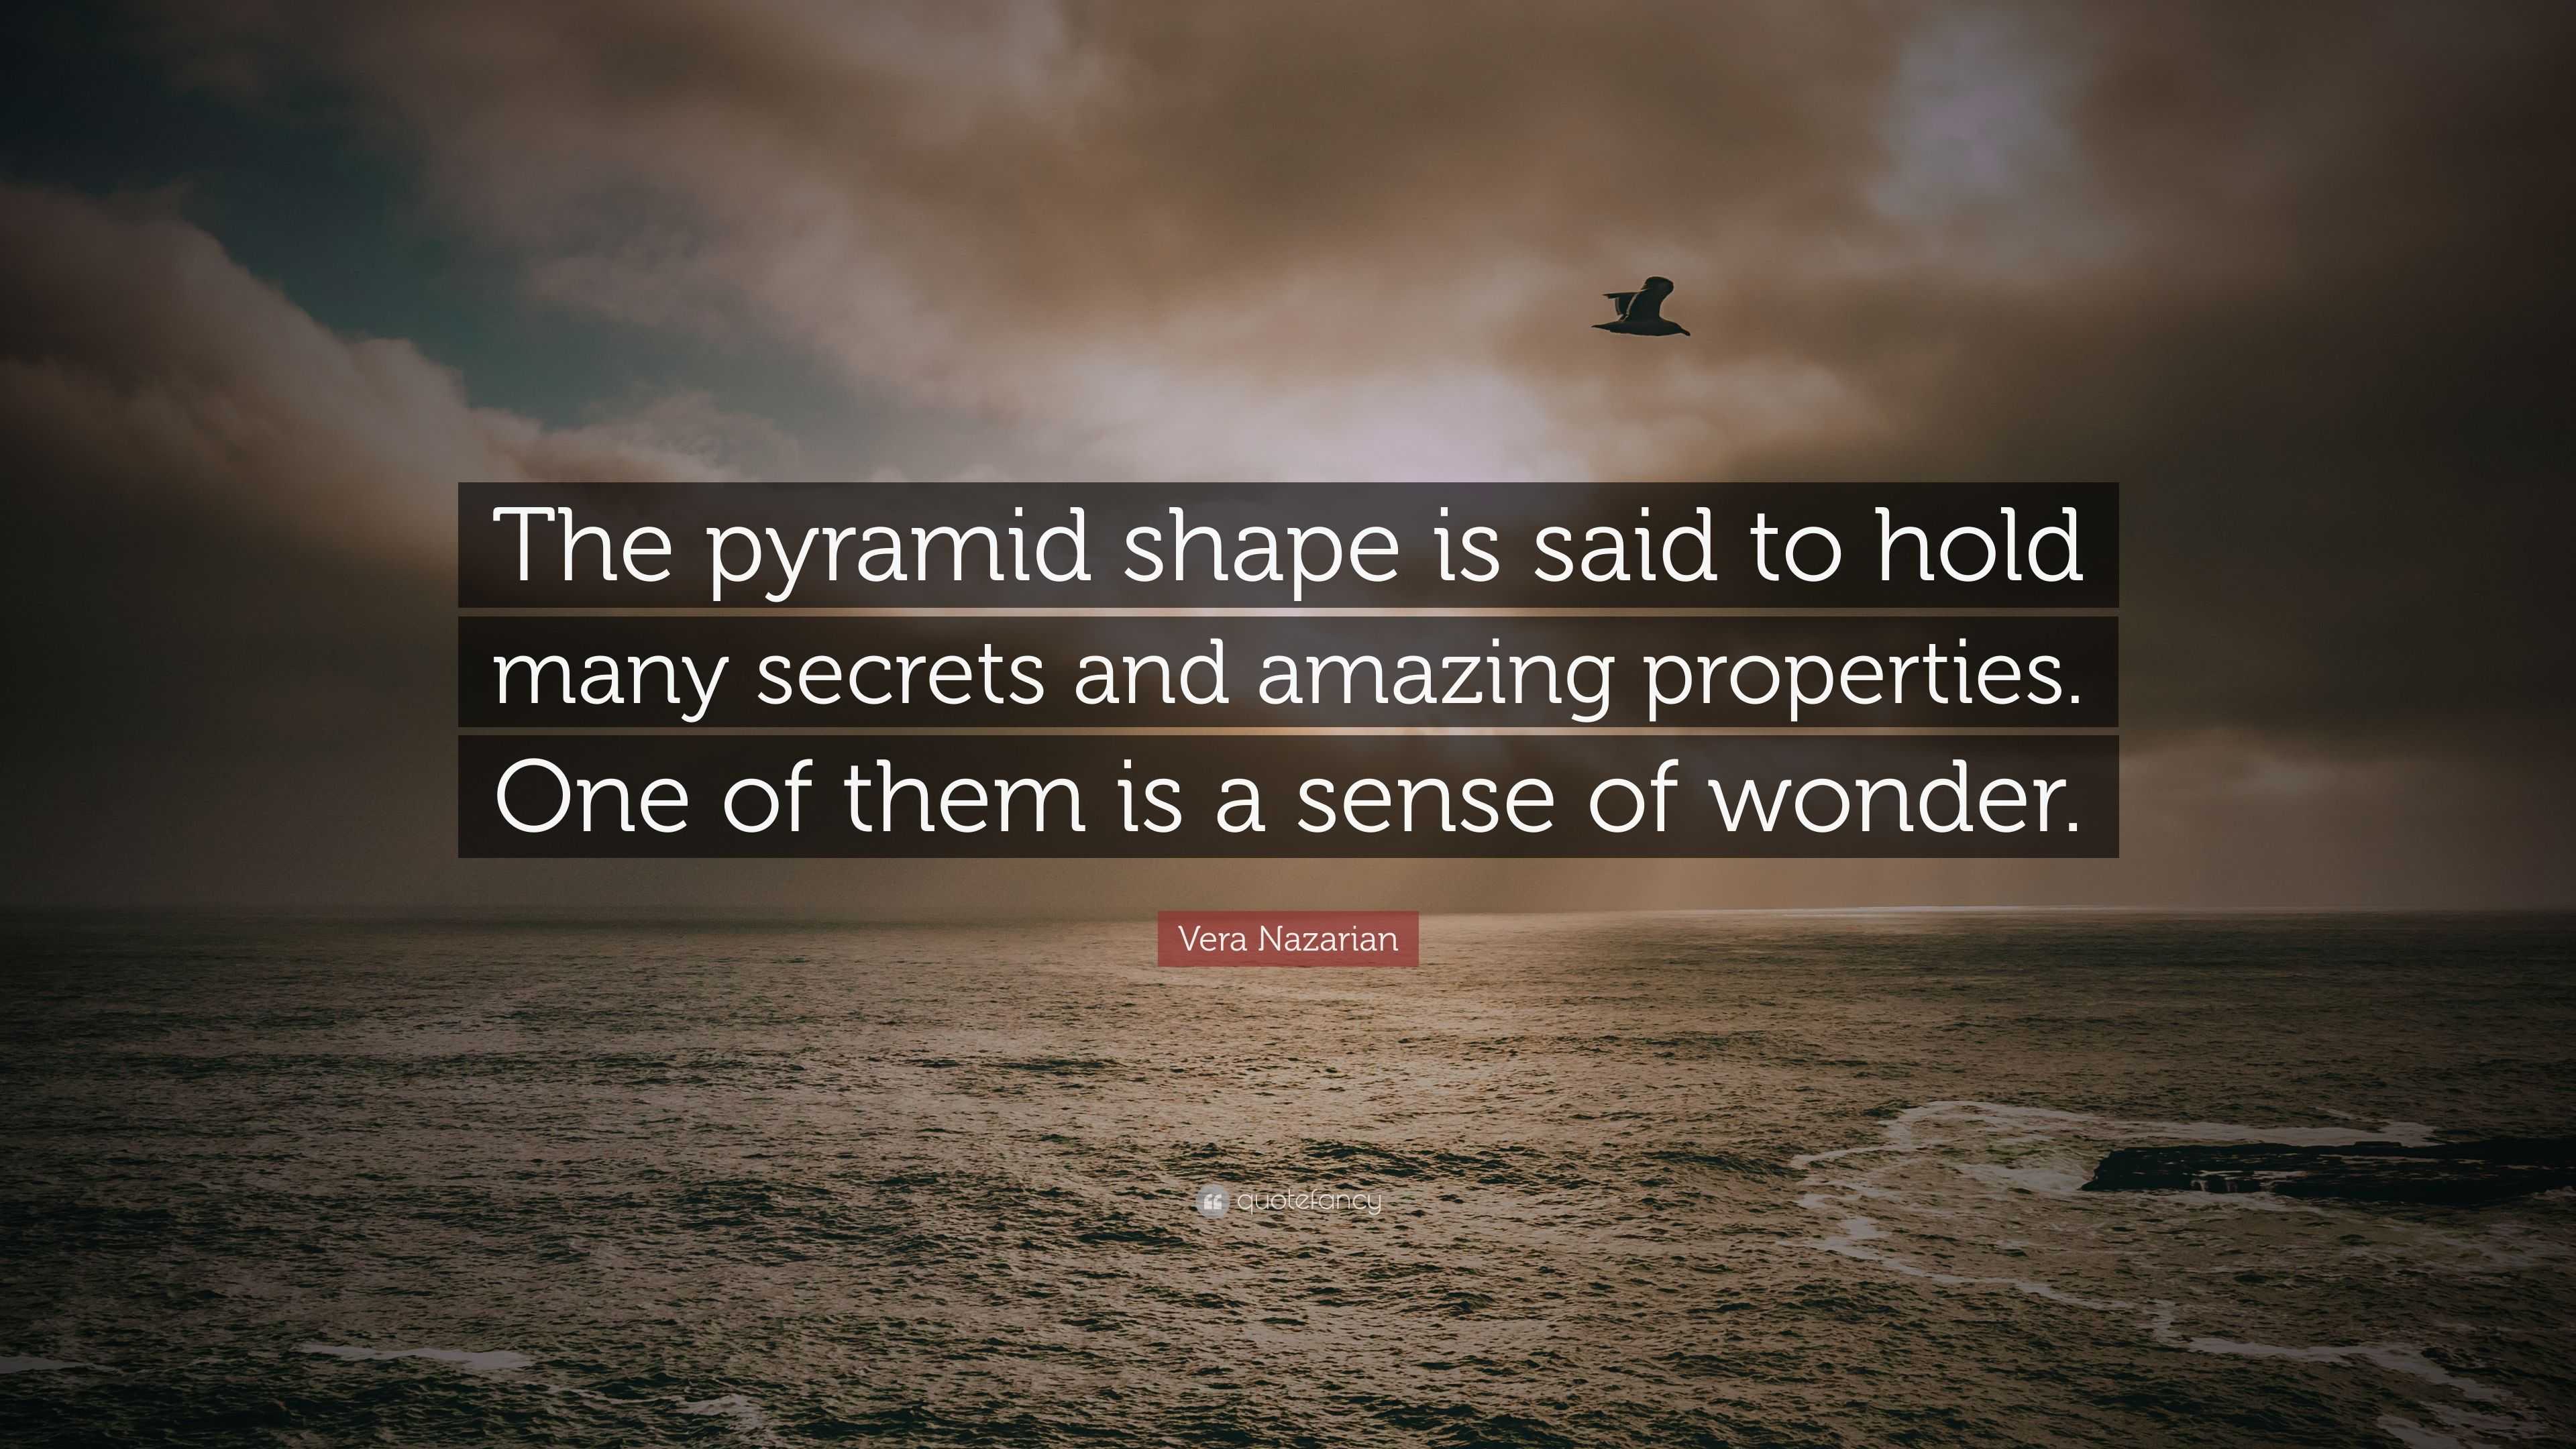 Vera Nazarian Quote: “The pyramid shape is said to hold many secrets and  amazing properties. One